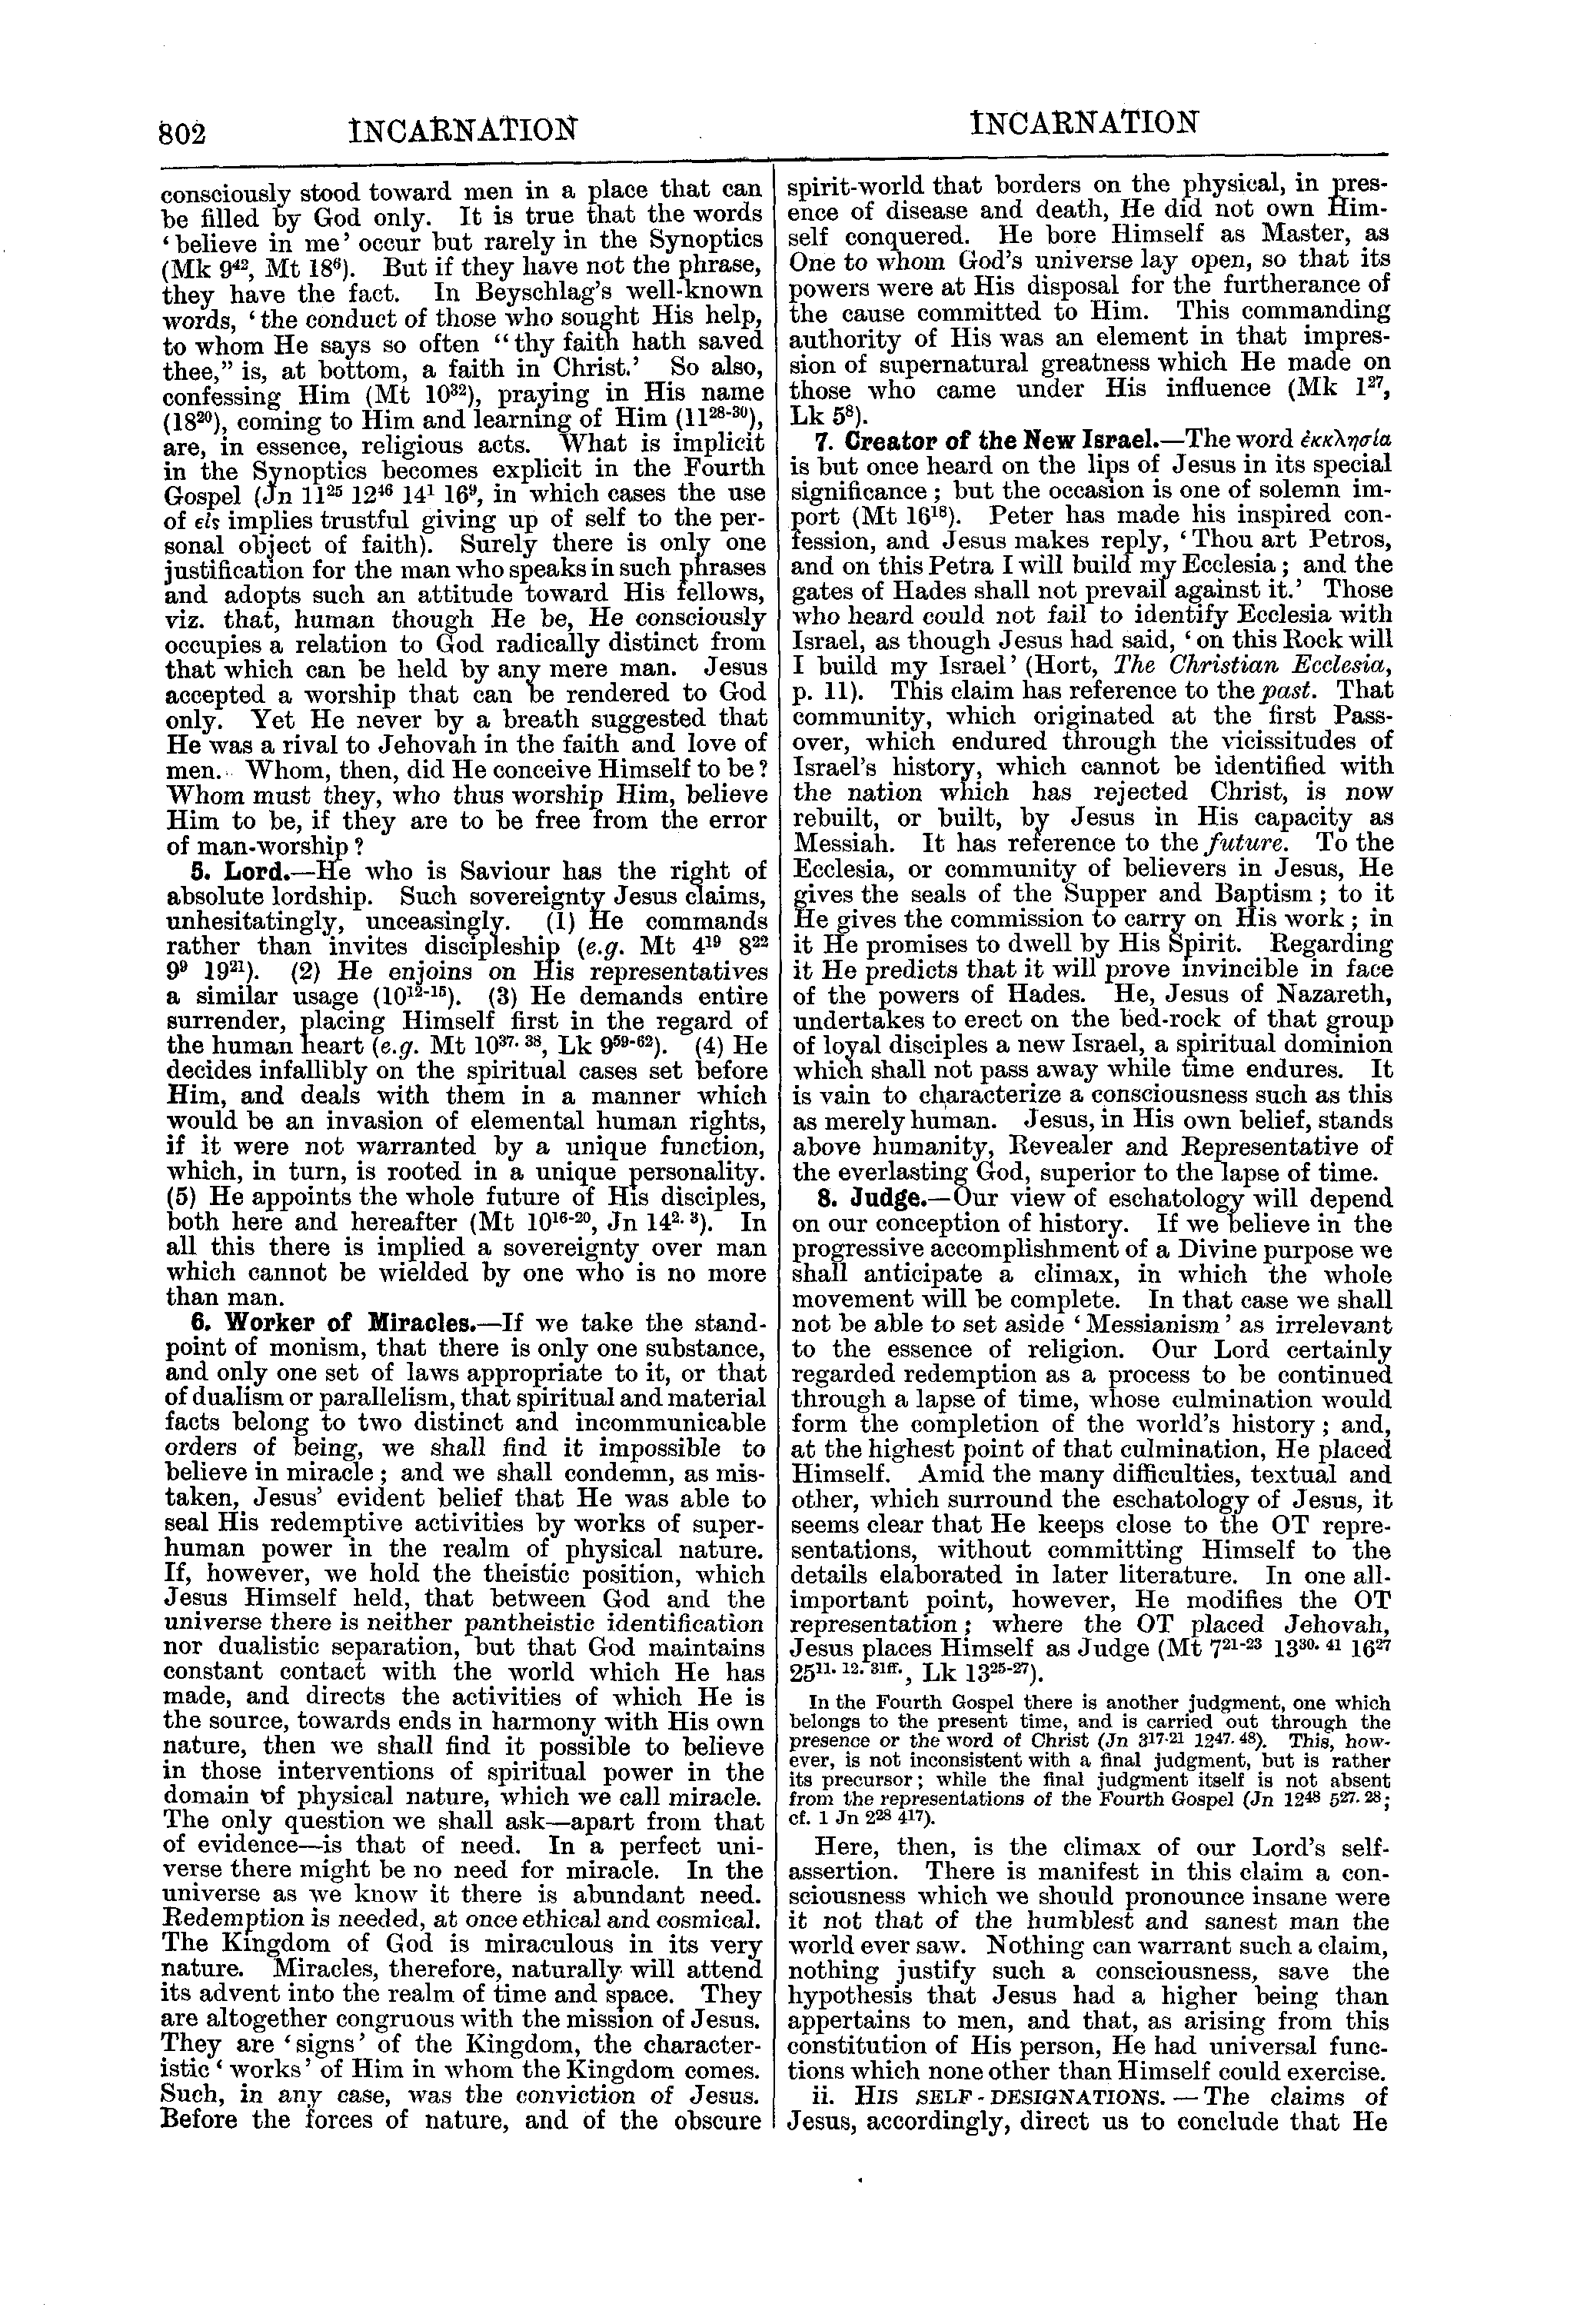 Image of page 802